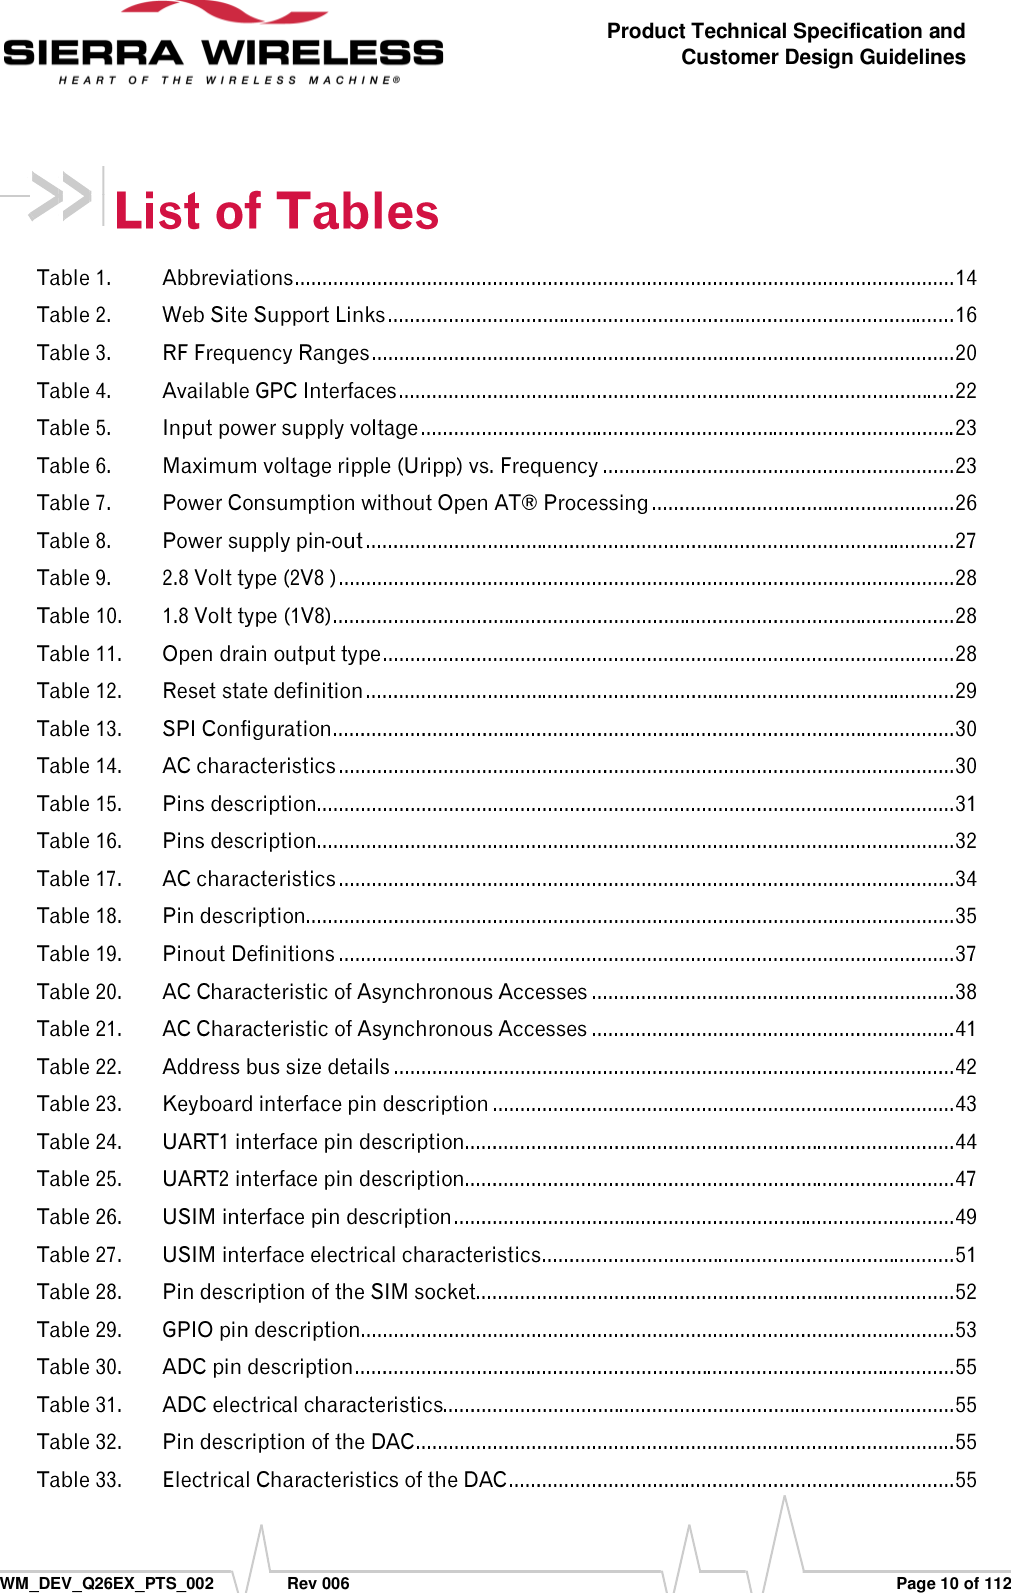      WM_DEV_Q26EX_PTS_002  Rev 006  Page 10 of 112 Product Technical Specification and Customer Design Guidelines                                                                                                    